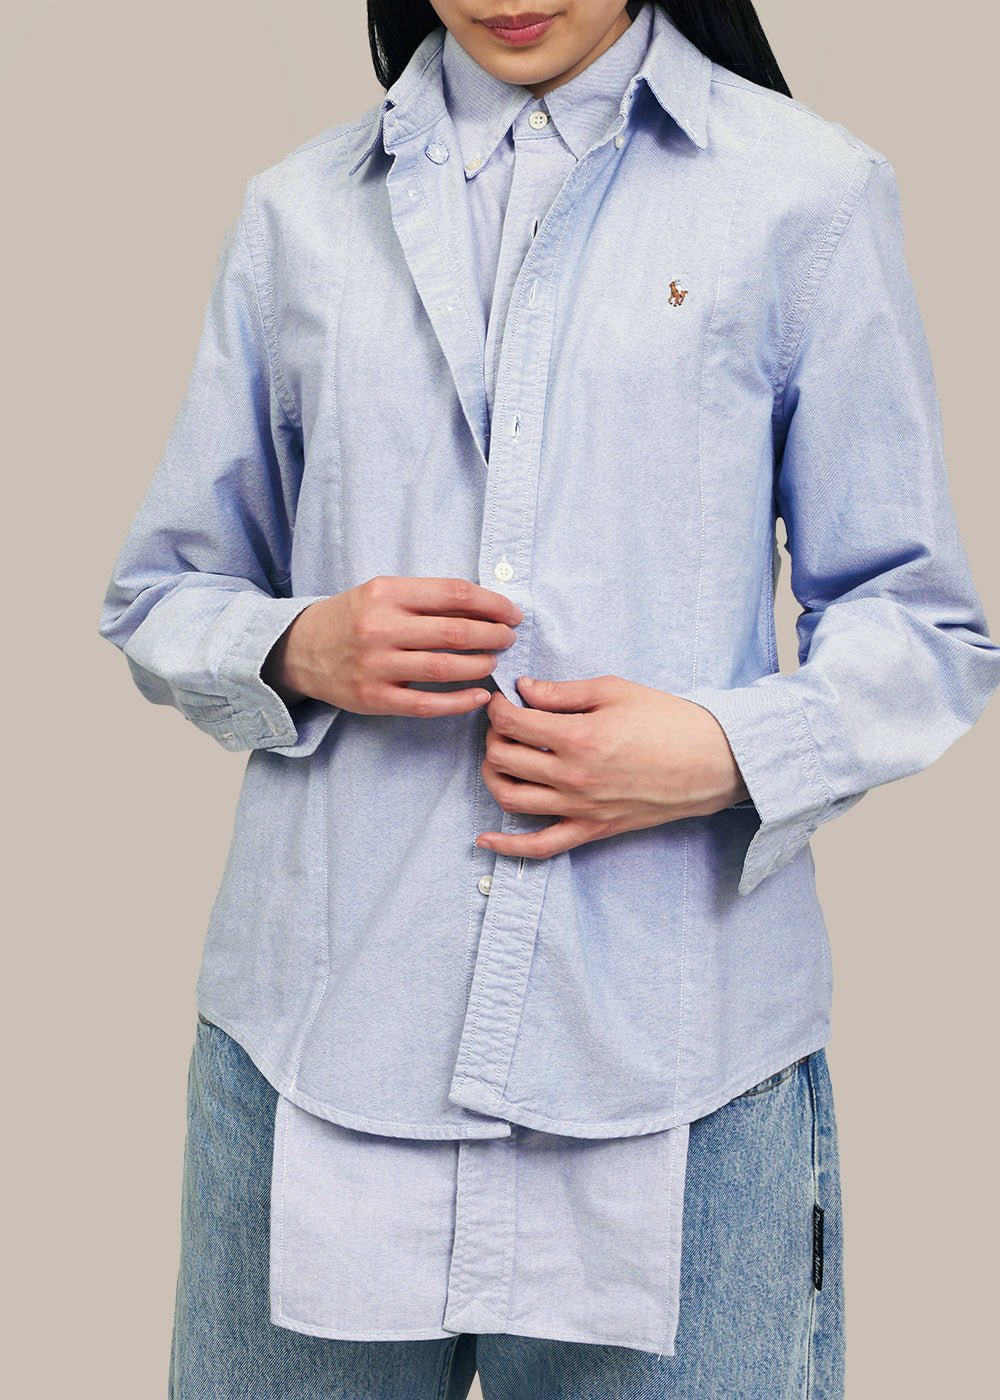 Paris RE Made Blue Double Collar Vintage Shirt - New Classics Studios Sustainable Ethical Fashion Canada